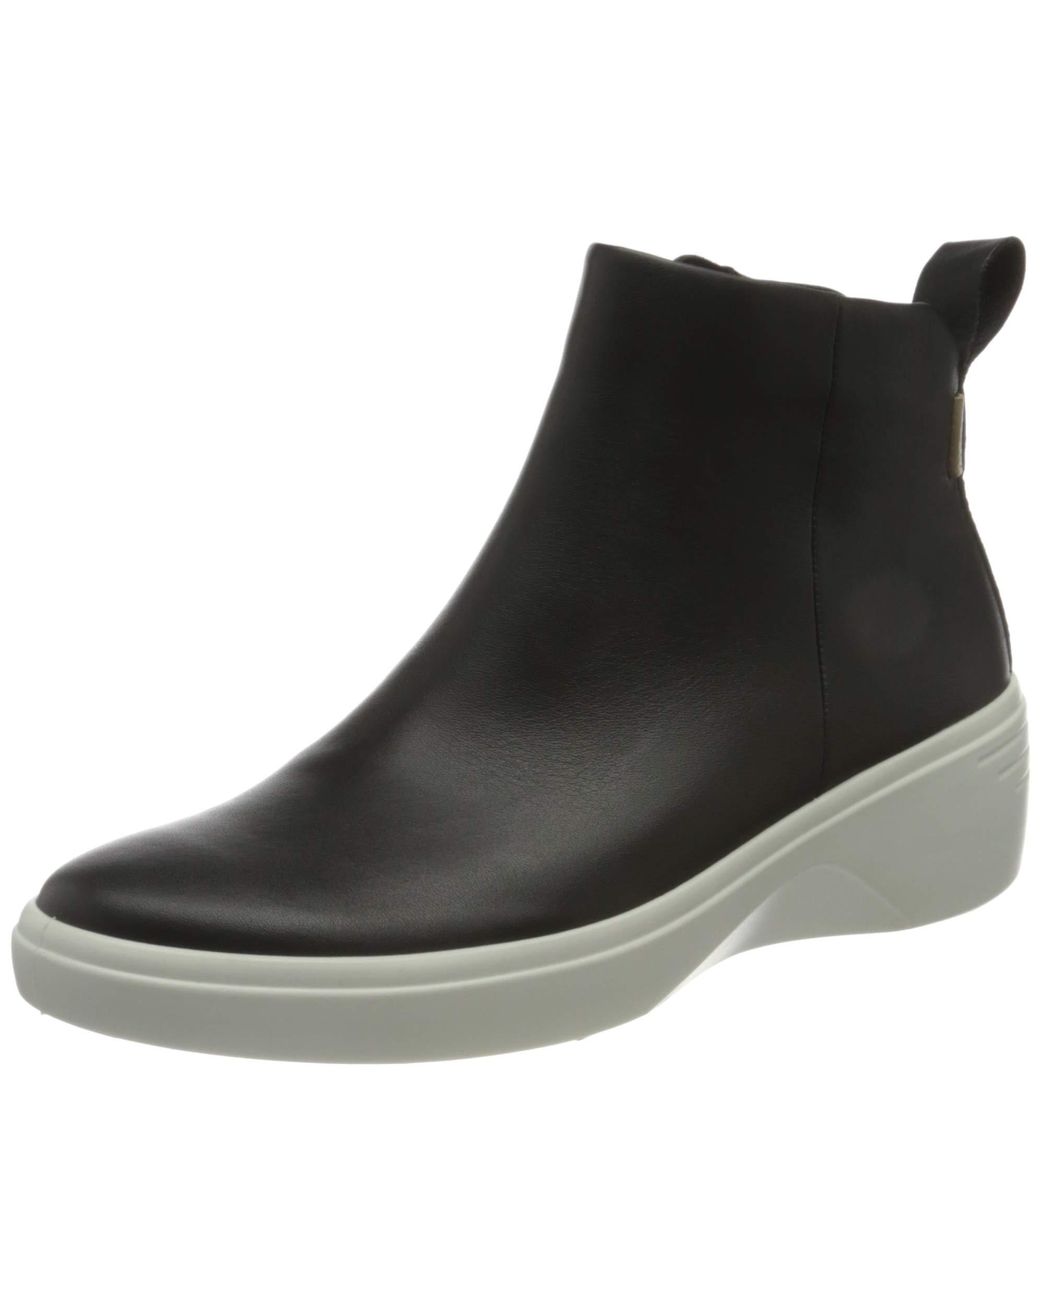 Ecco Soft 7 Wedge Black Droid Ankle Boot | Lyst